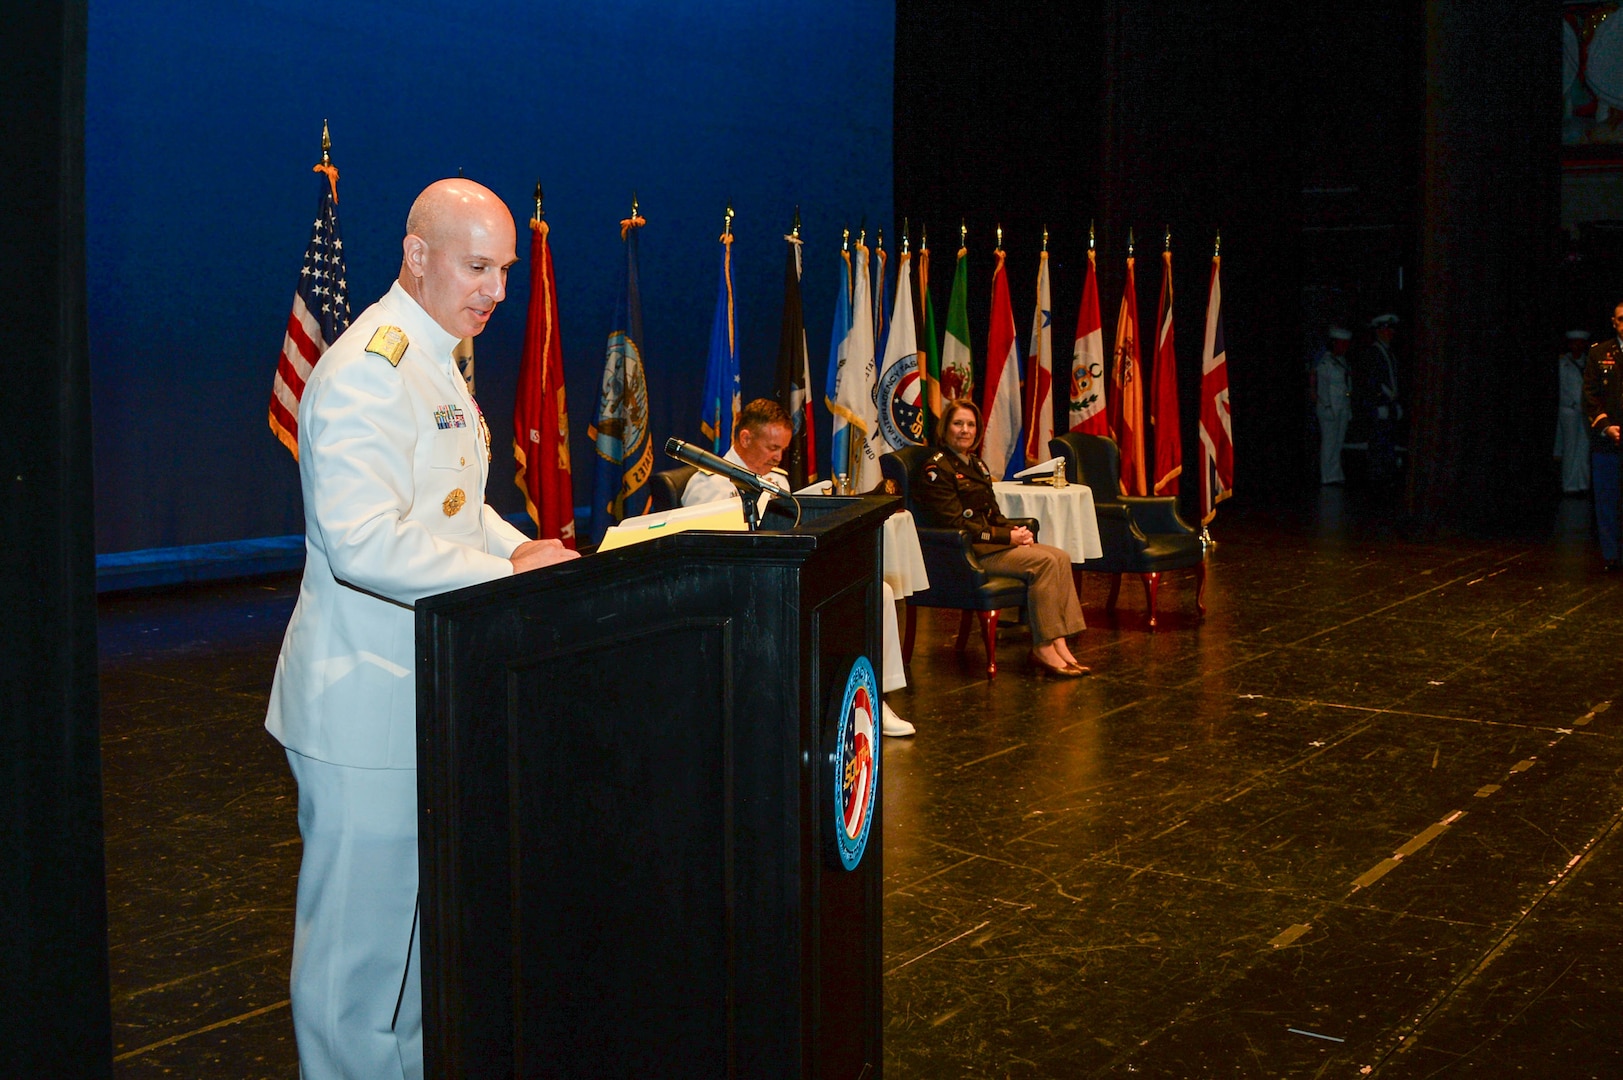 U.S. Coast Guard Rear Adm. Mark Fedor, gives his remarks during a change of command ceremony.